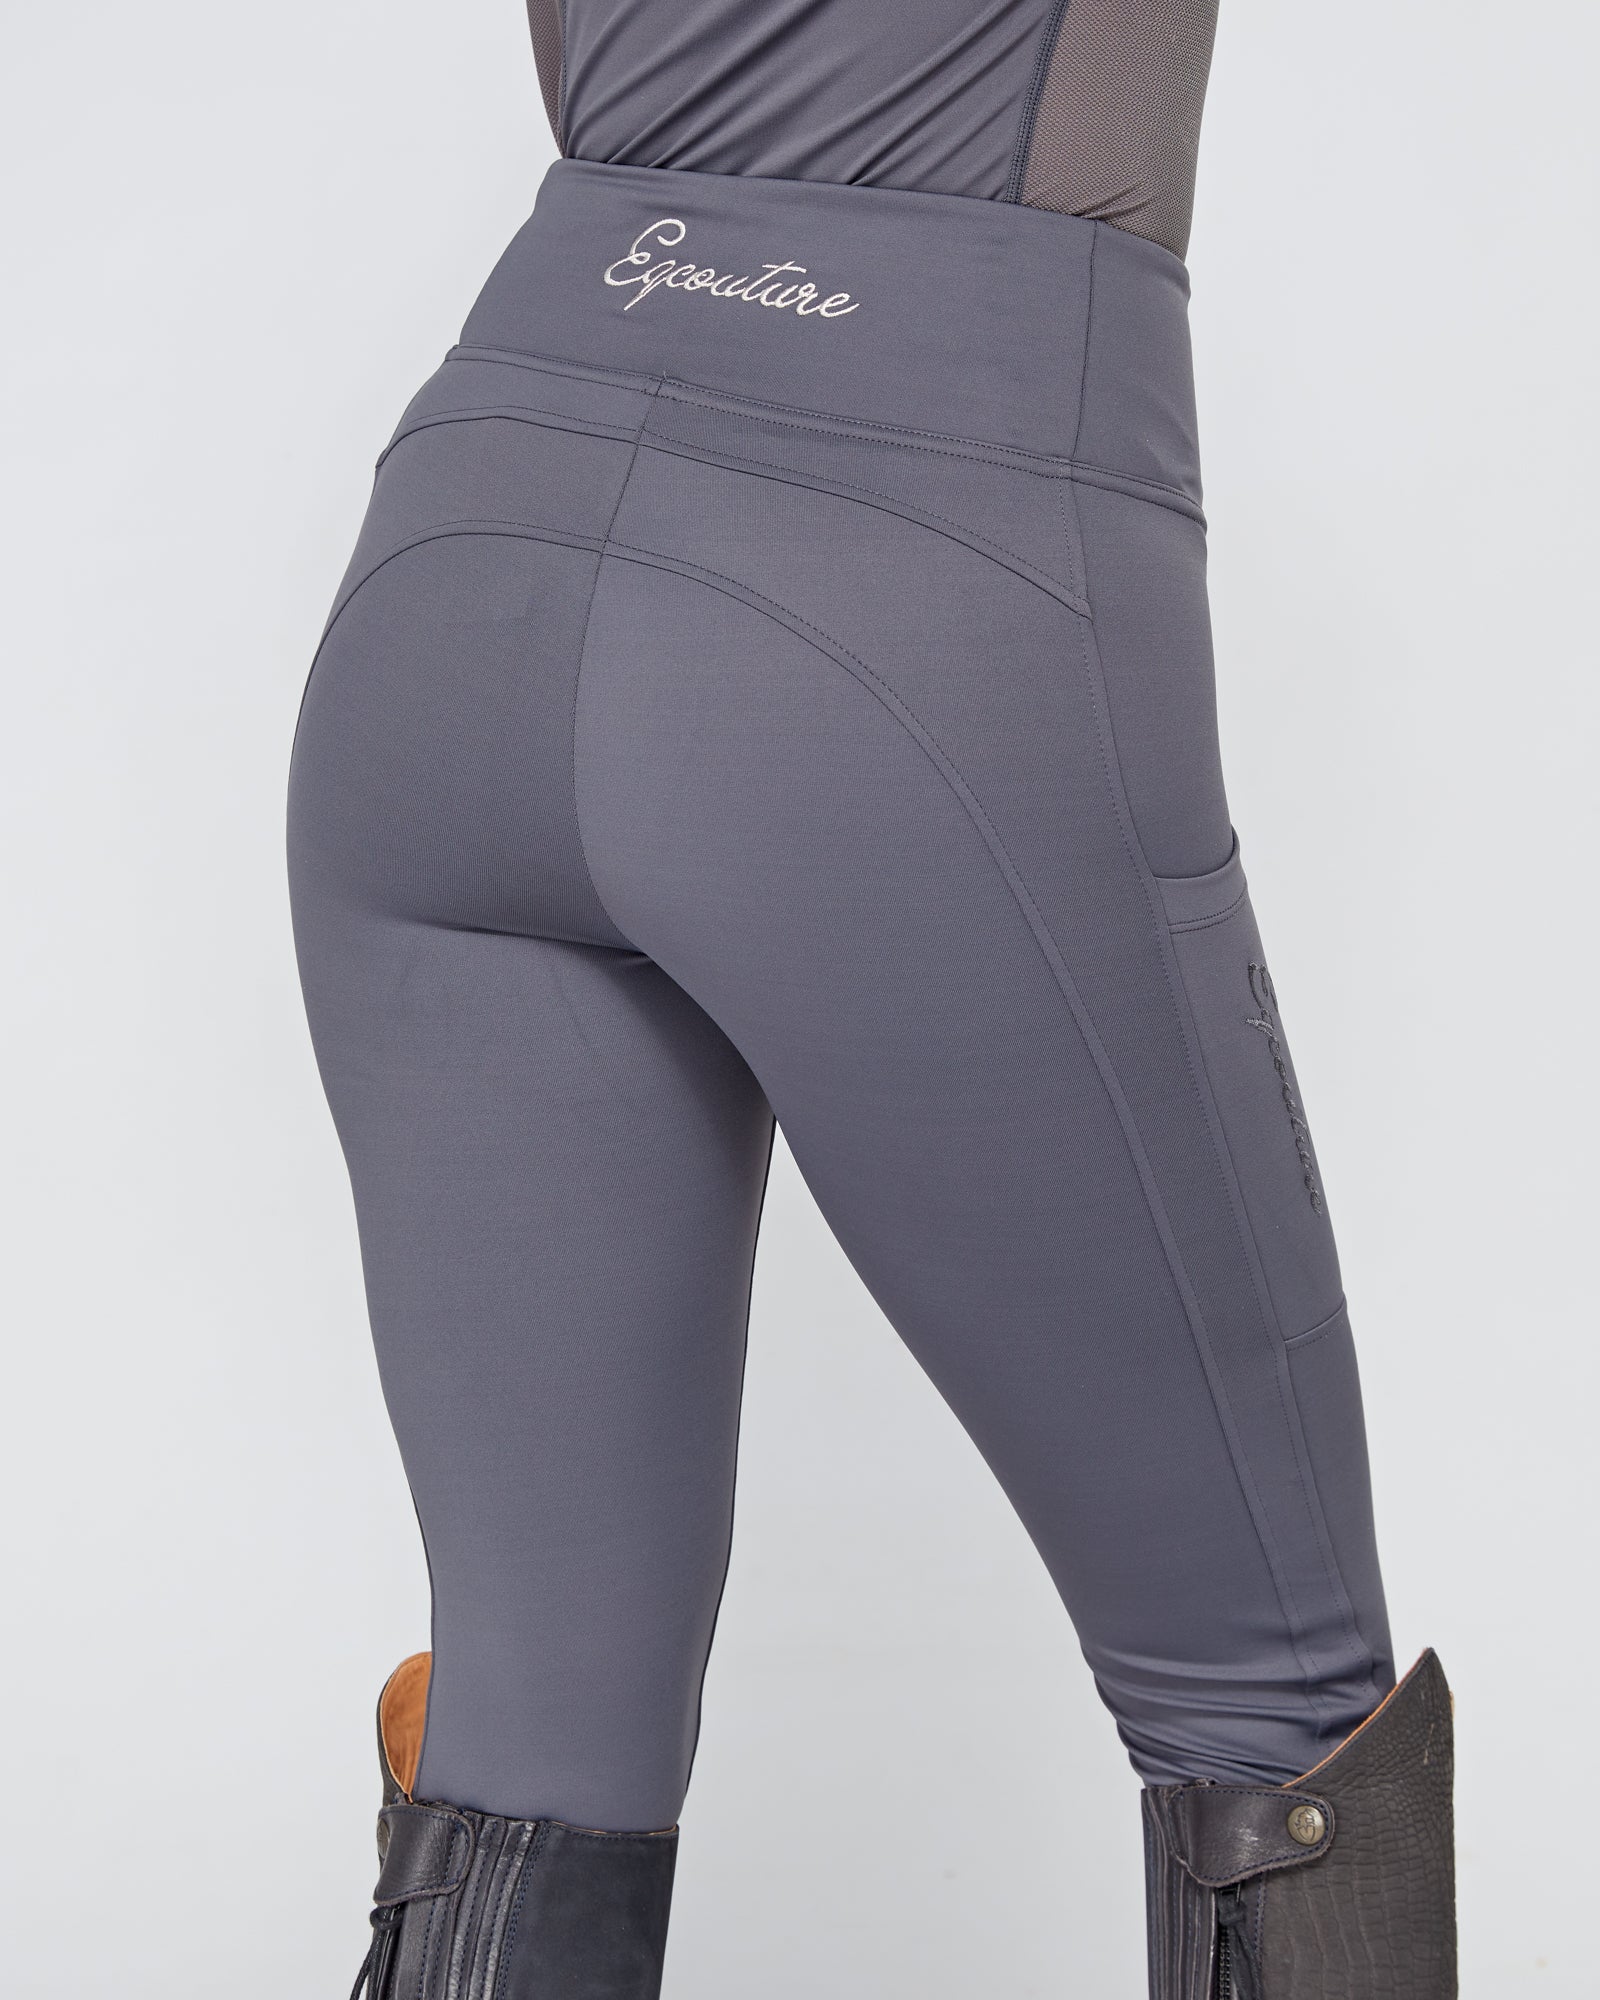 WINTER Slate Grey Riding Leggings / Tights with Phone Pockets - NO GRIP/ SILICONE